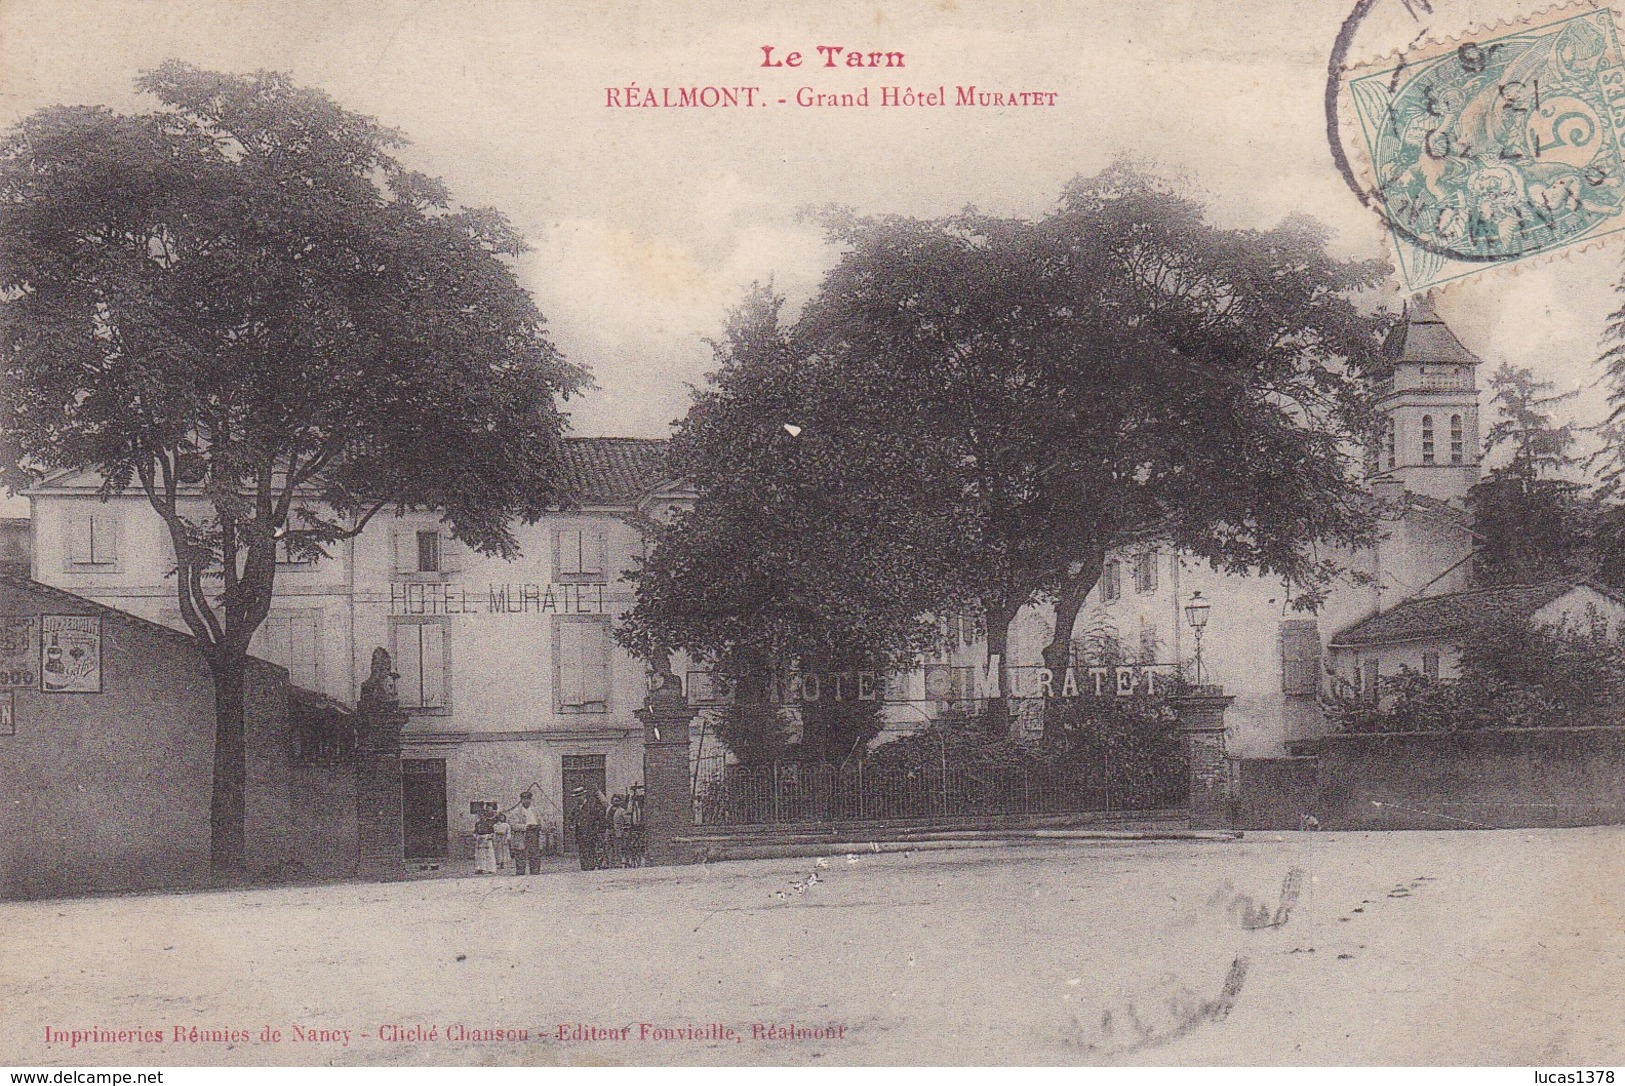 81 / REALMONT / LE GRAND HOTEL MURATET - Realmont